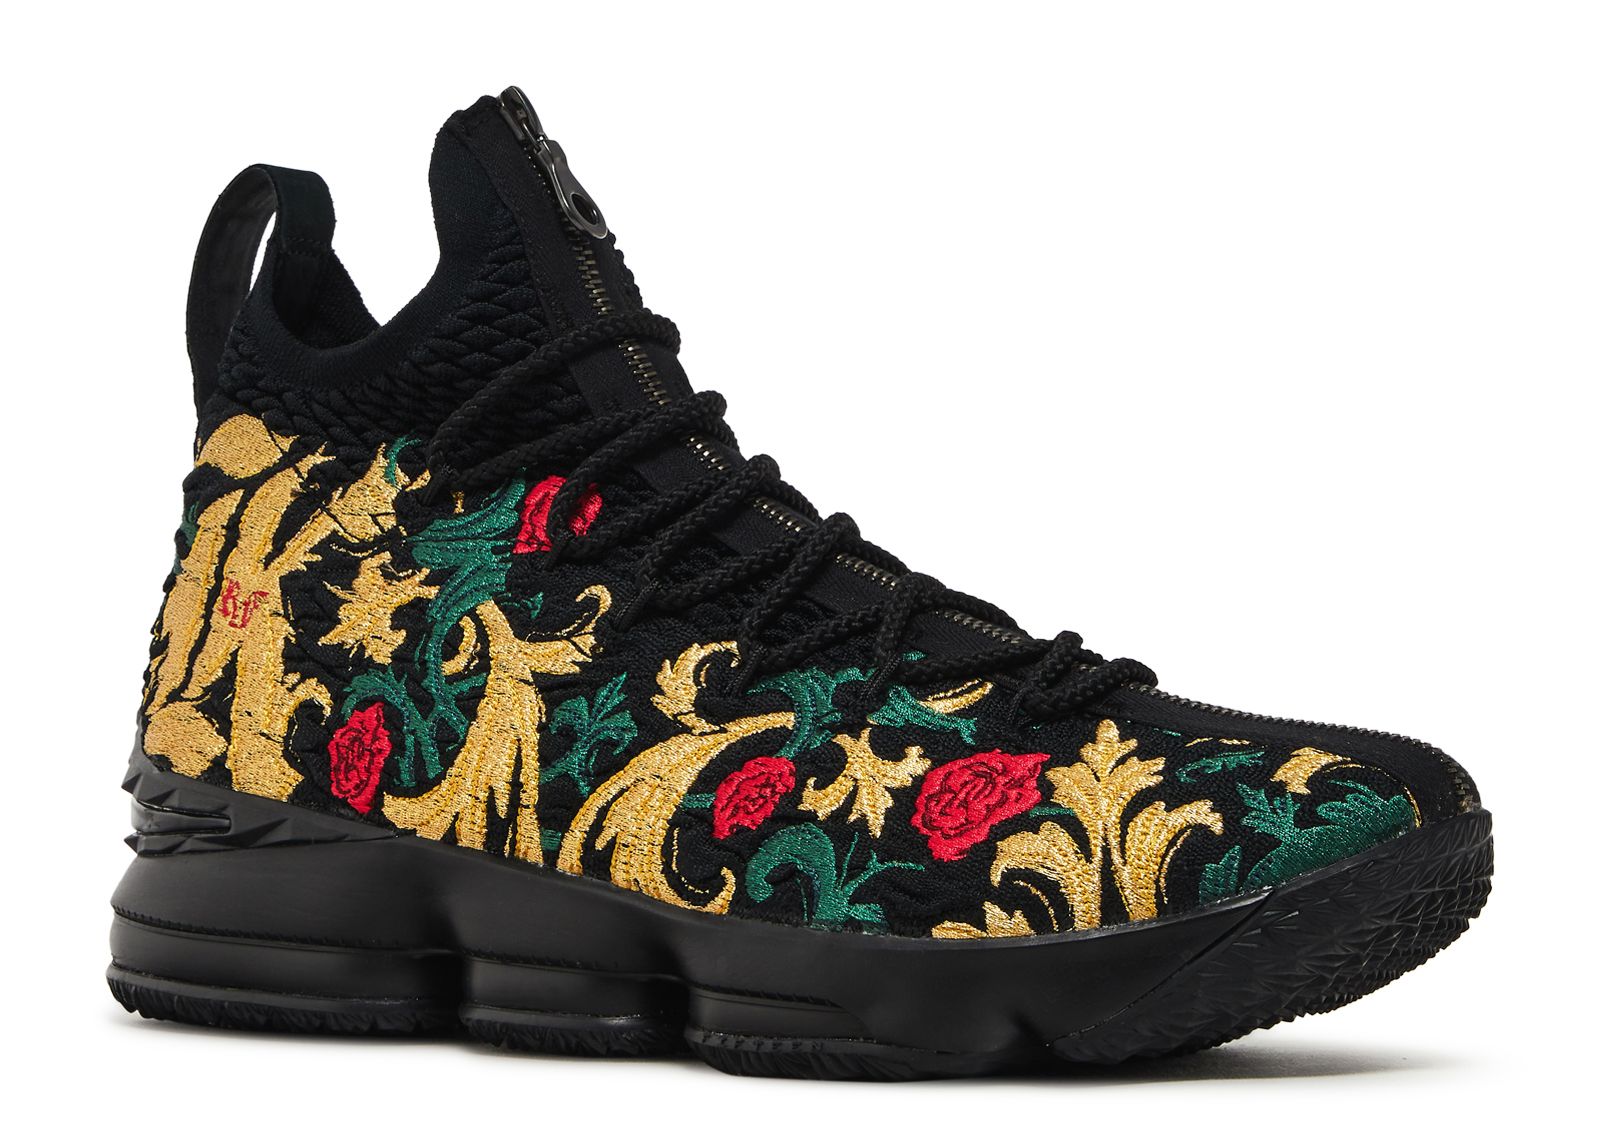 lebron 15 kith release date